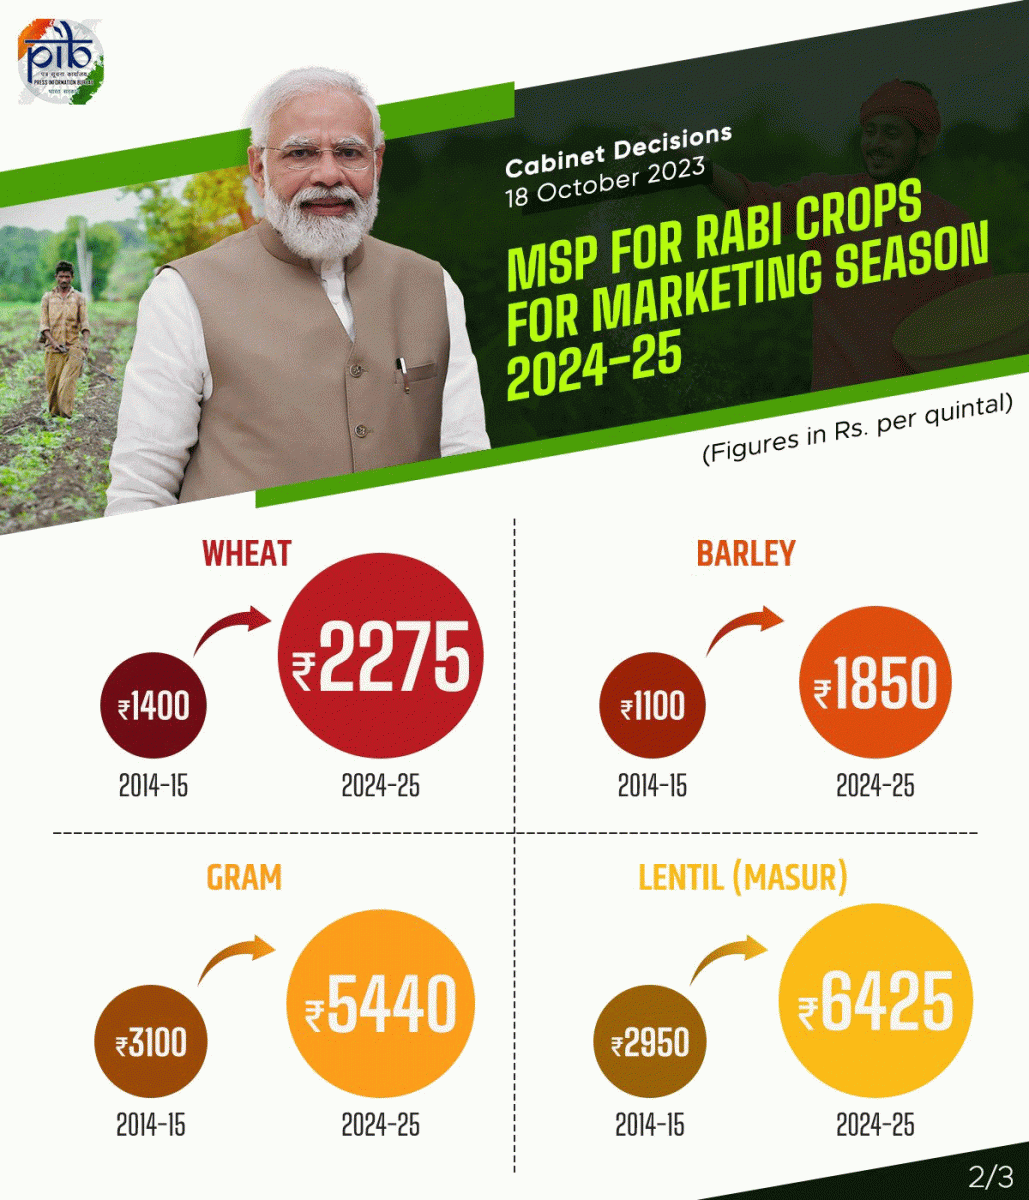  Central Govt Approves Rabi Crops MSP Increased For Marketing Season 2024-25 